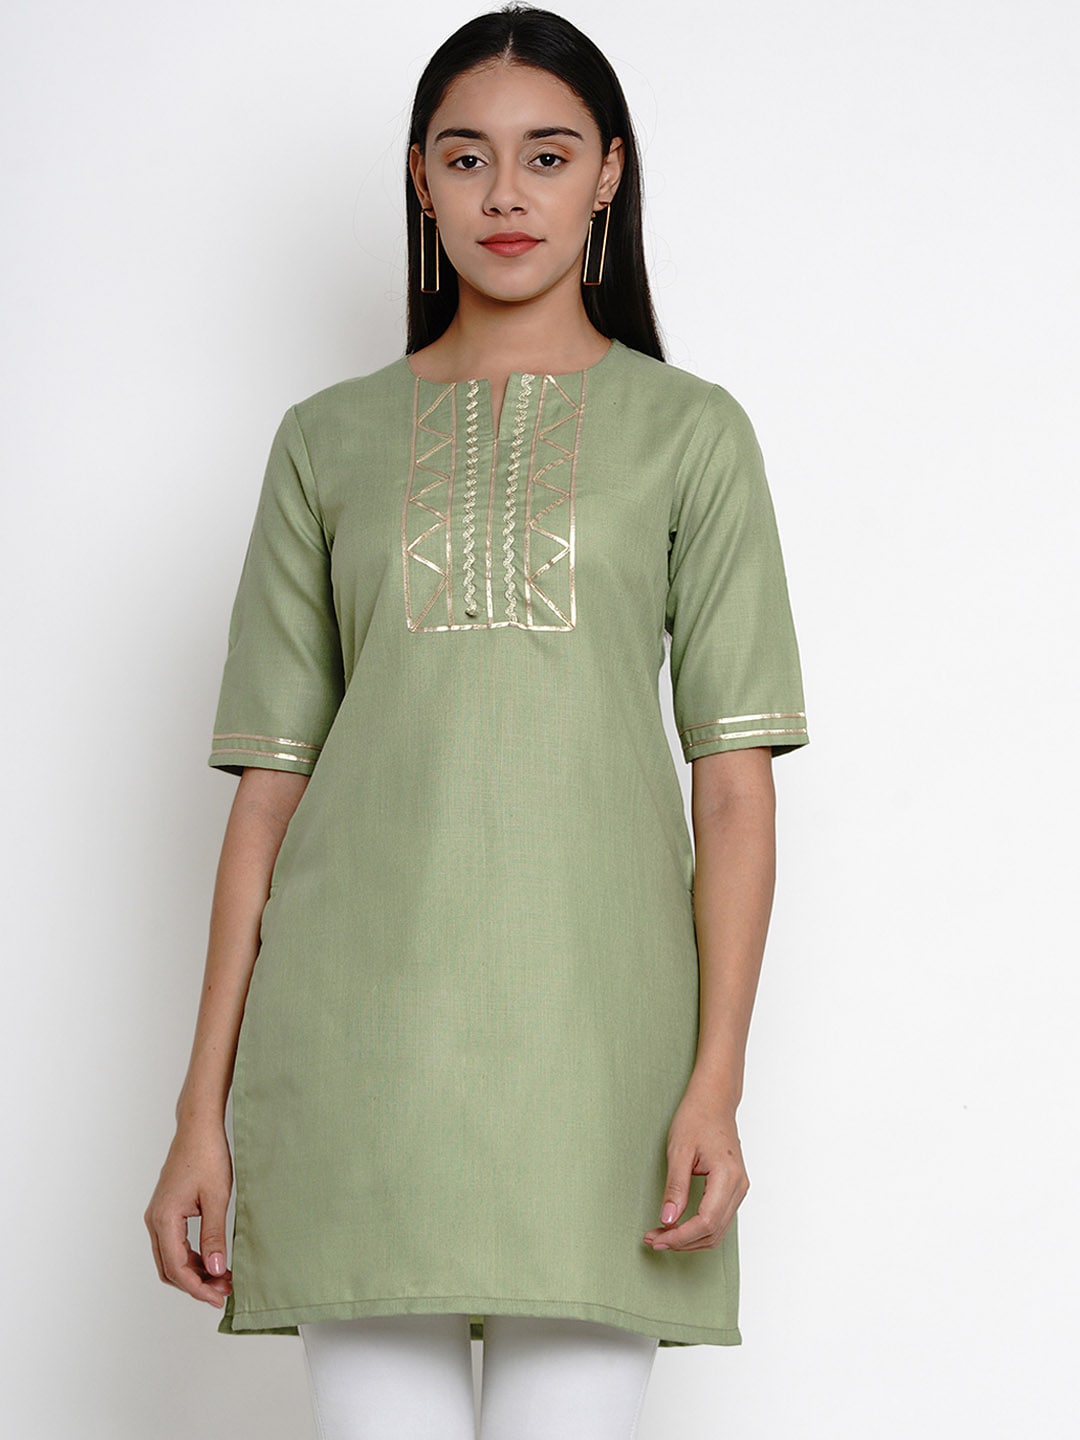 Bhama Couture Women Green Pure Cotton Kurti with Lace Detailing Price in India